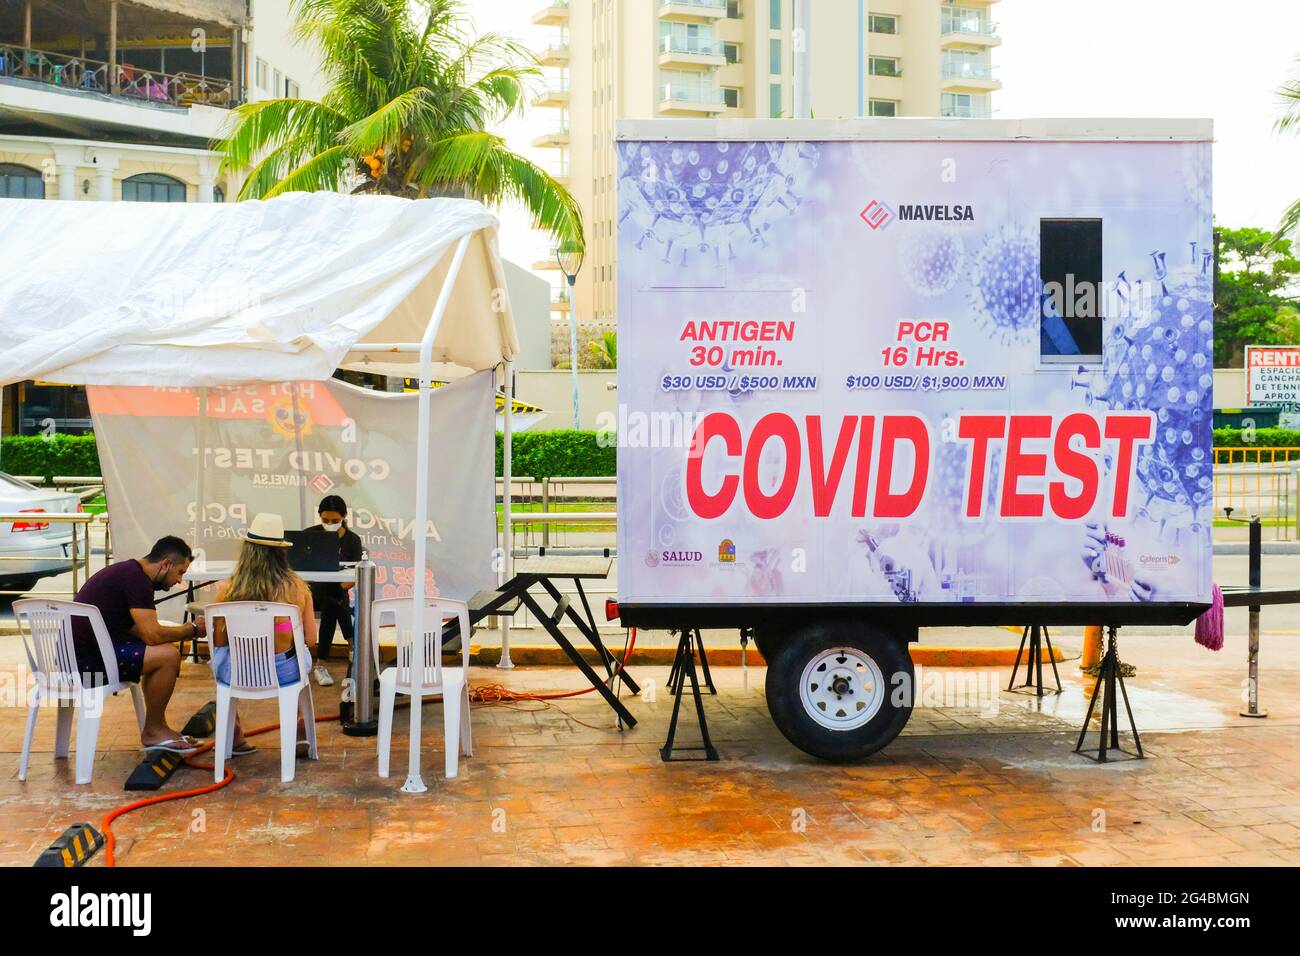 Covid-19 testing unit in the Hotel Zone of Cancun Mexico, These testing units are everywhere as most countries require now a negative test for their nationals to reenter the country , June 2021 Stock Photo